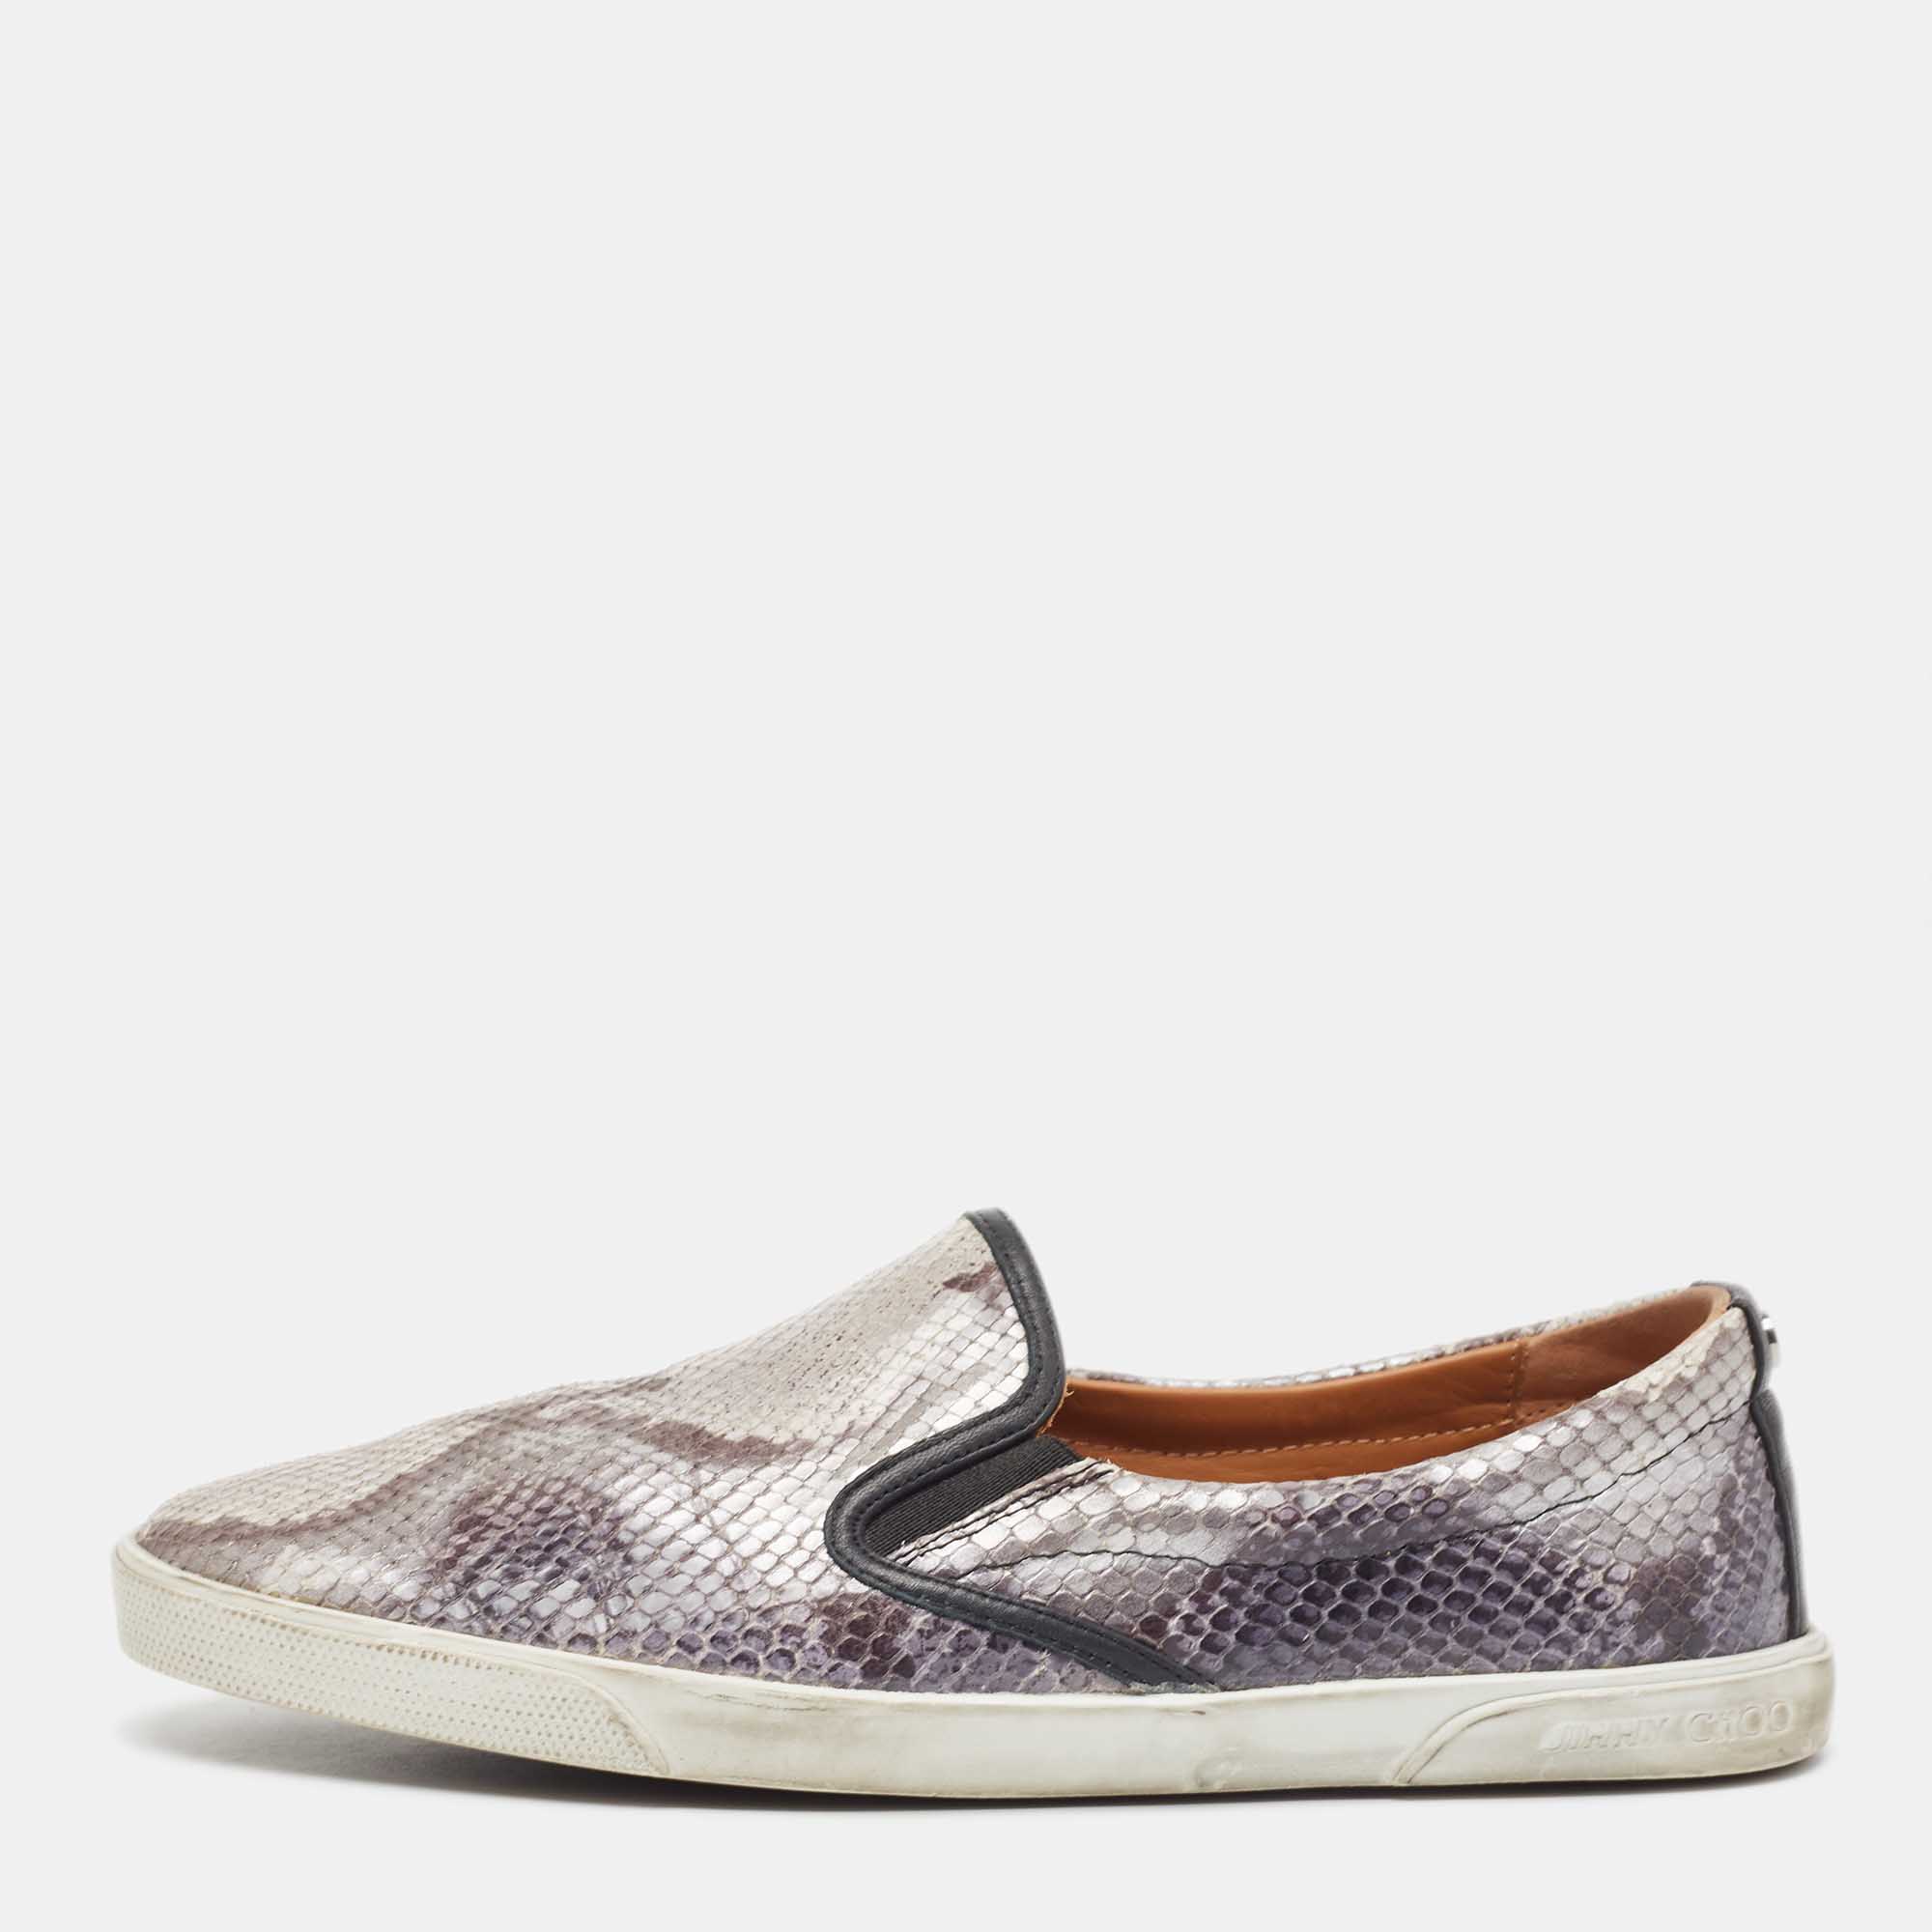 Pre-owned Jimmy Choo Grey Python Embossed Leather Demi Slip On Sneakers Size 40